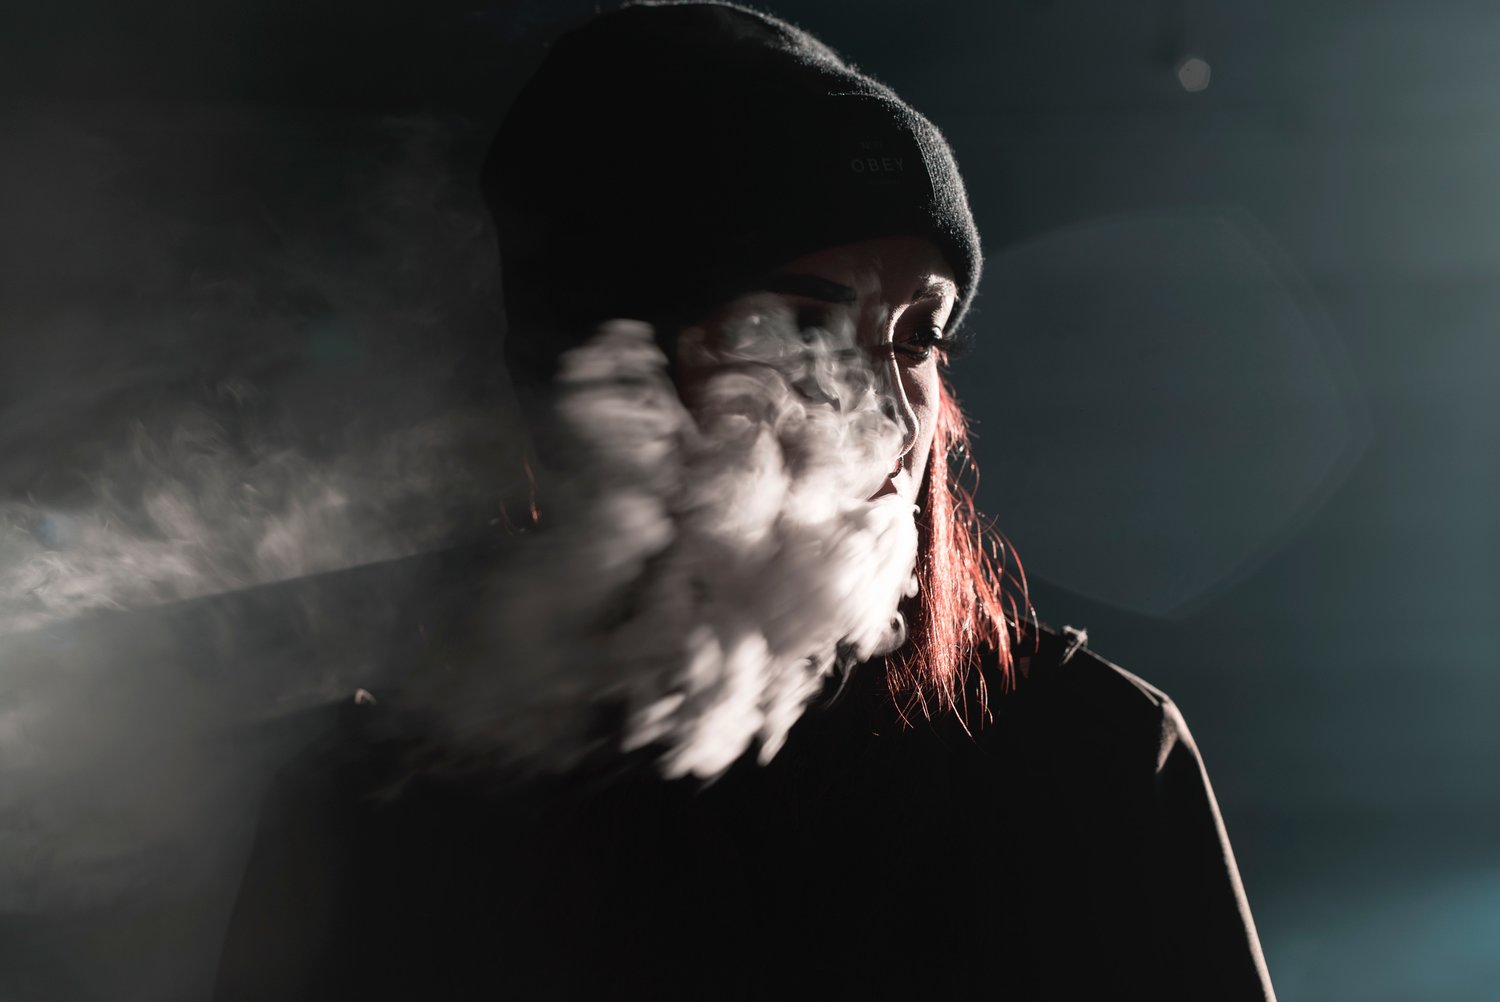 person with smoke in front of her face wearing a hat